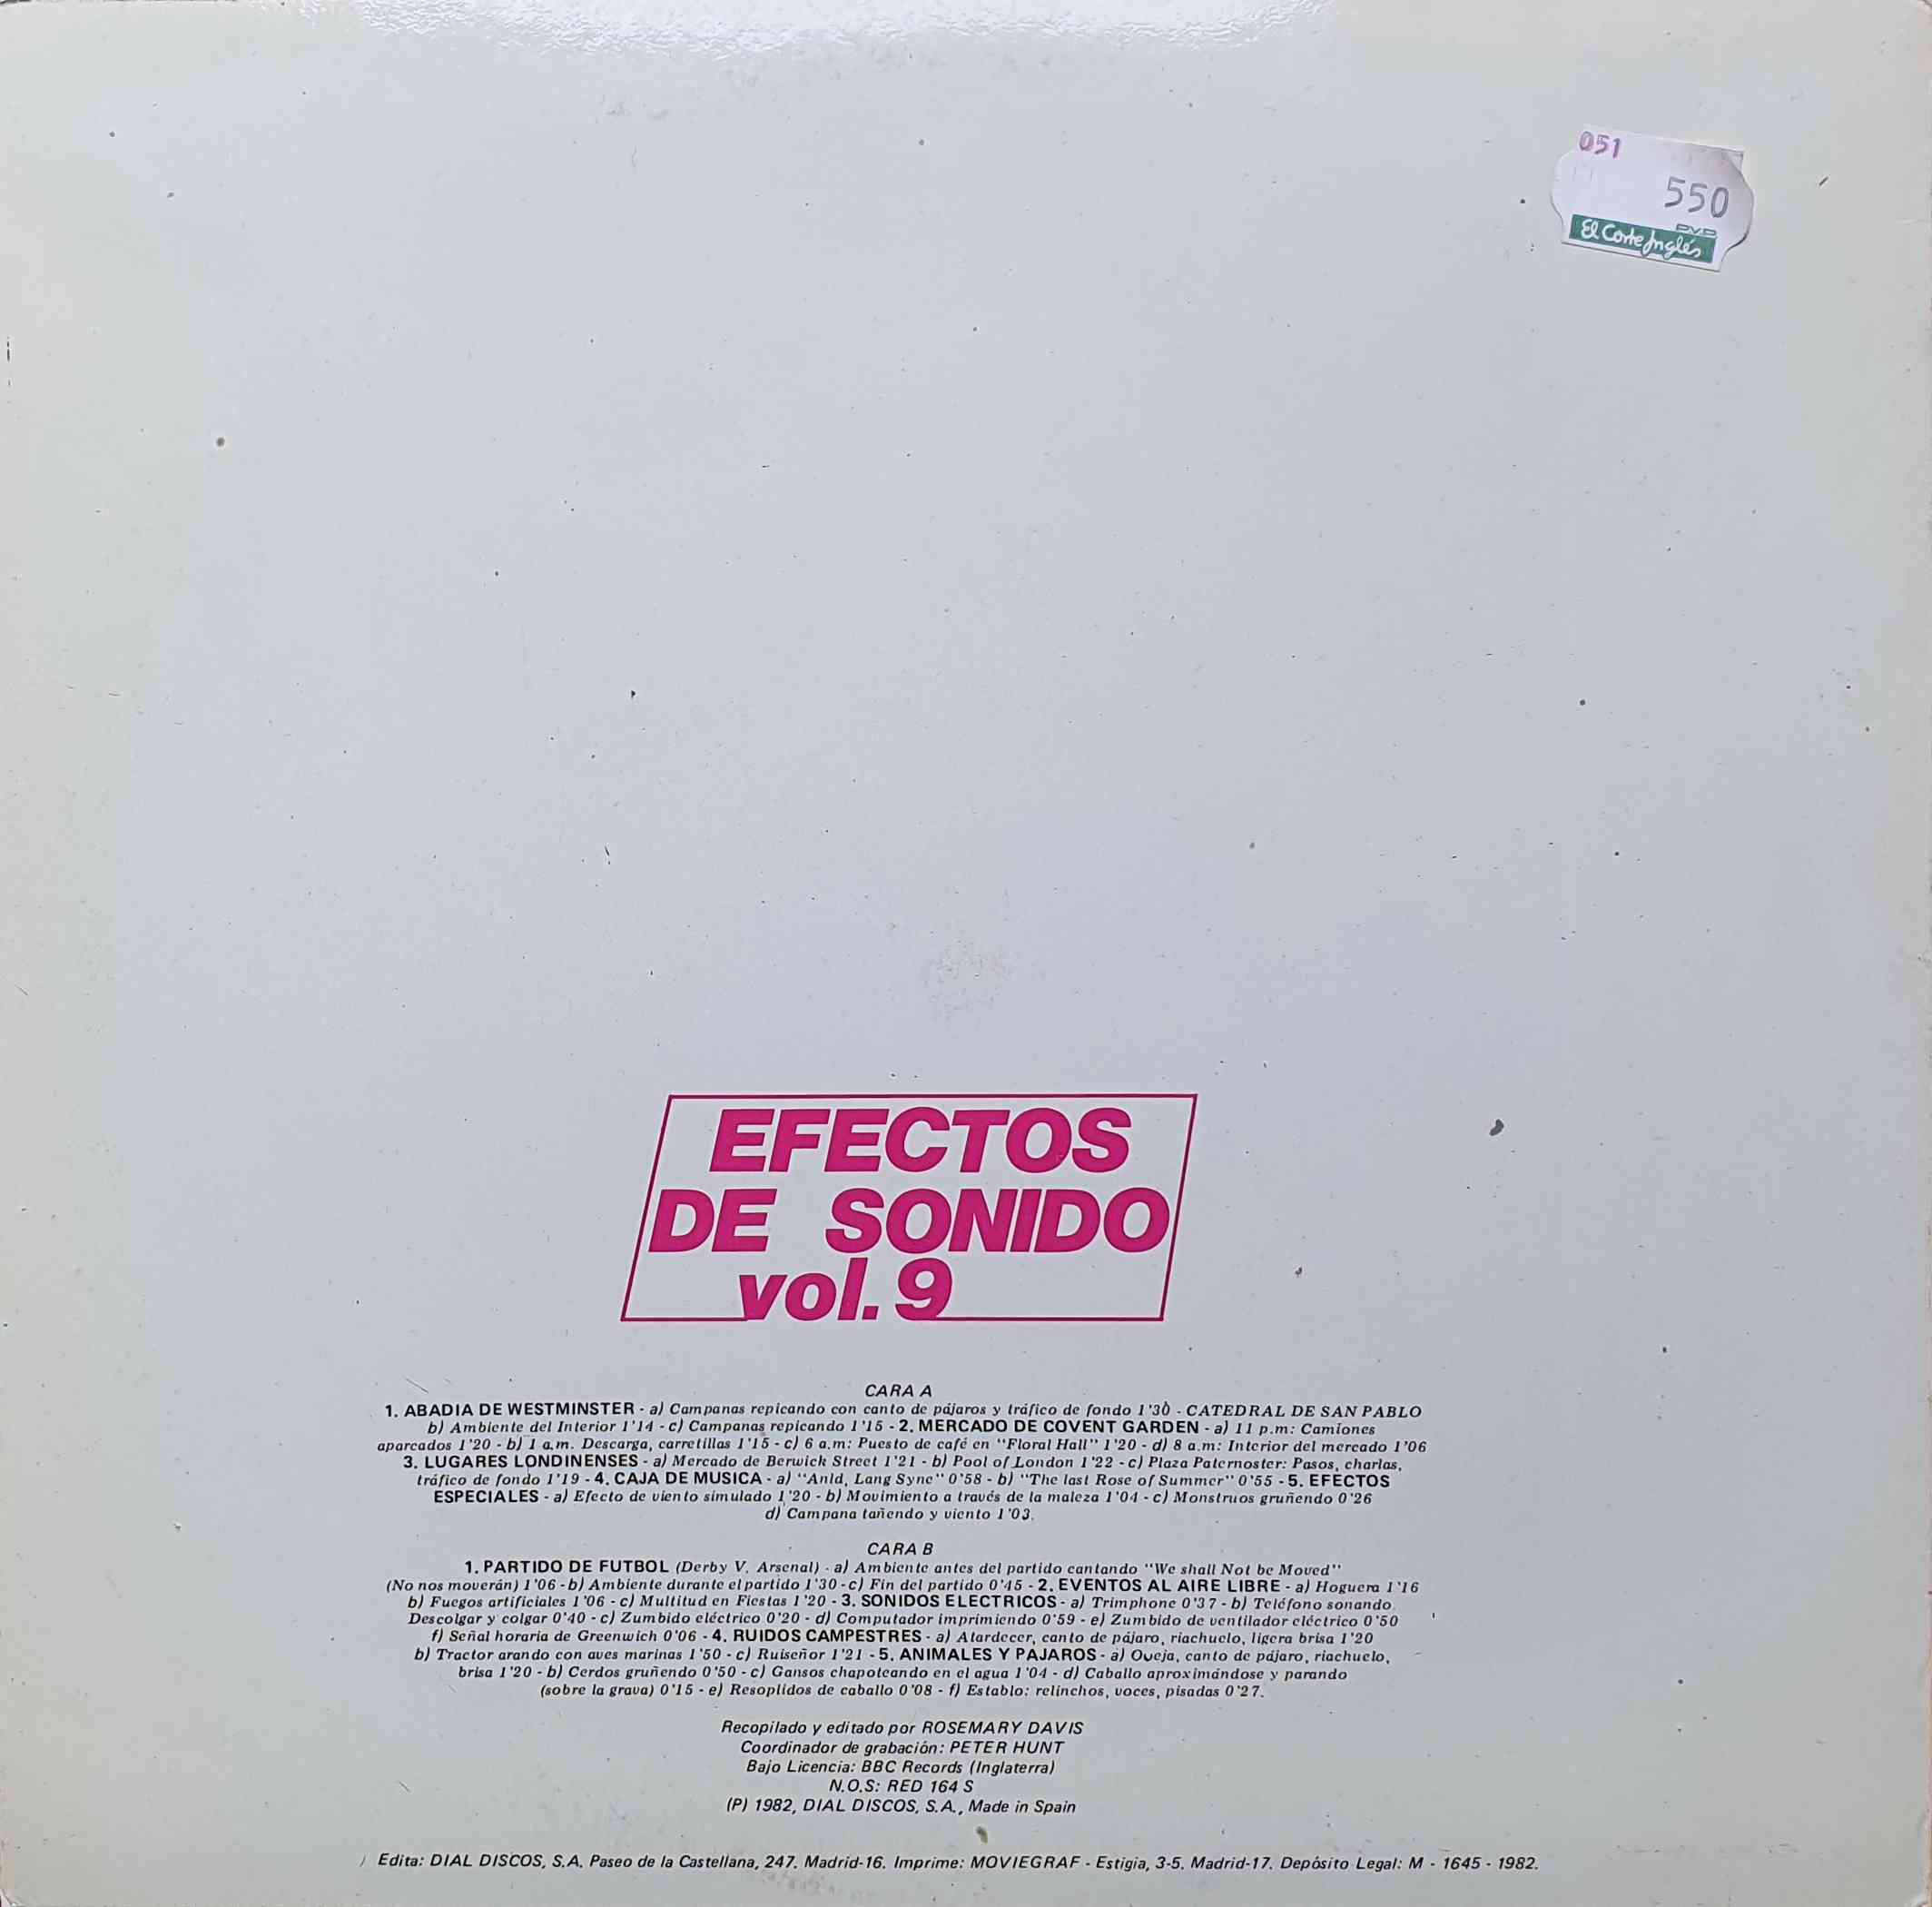 Picture of 51.0114 Musica & efectos para cine amateur Vol.10 by artist Various from the BBC records and Tapes library